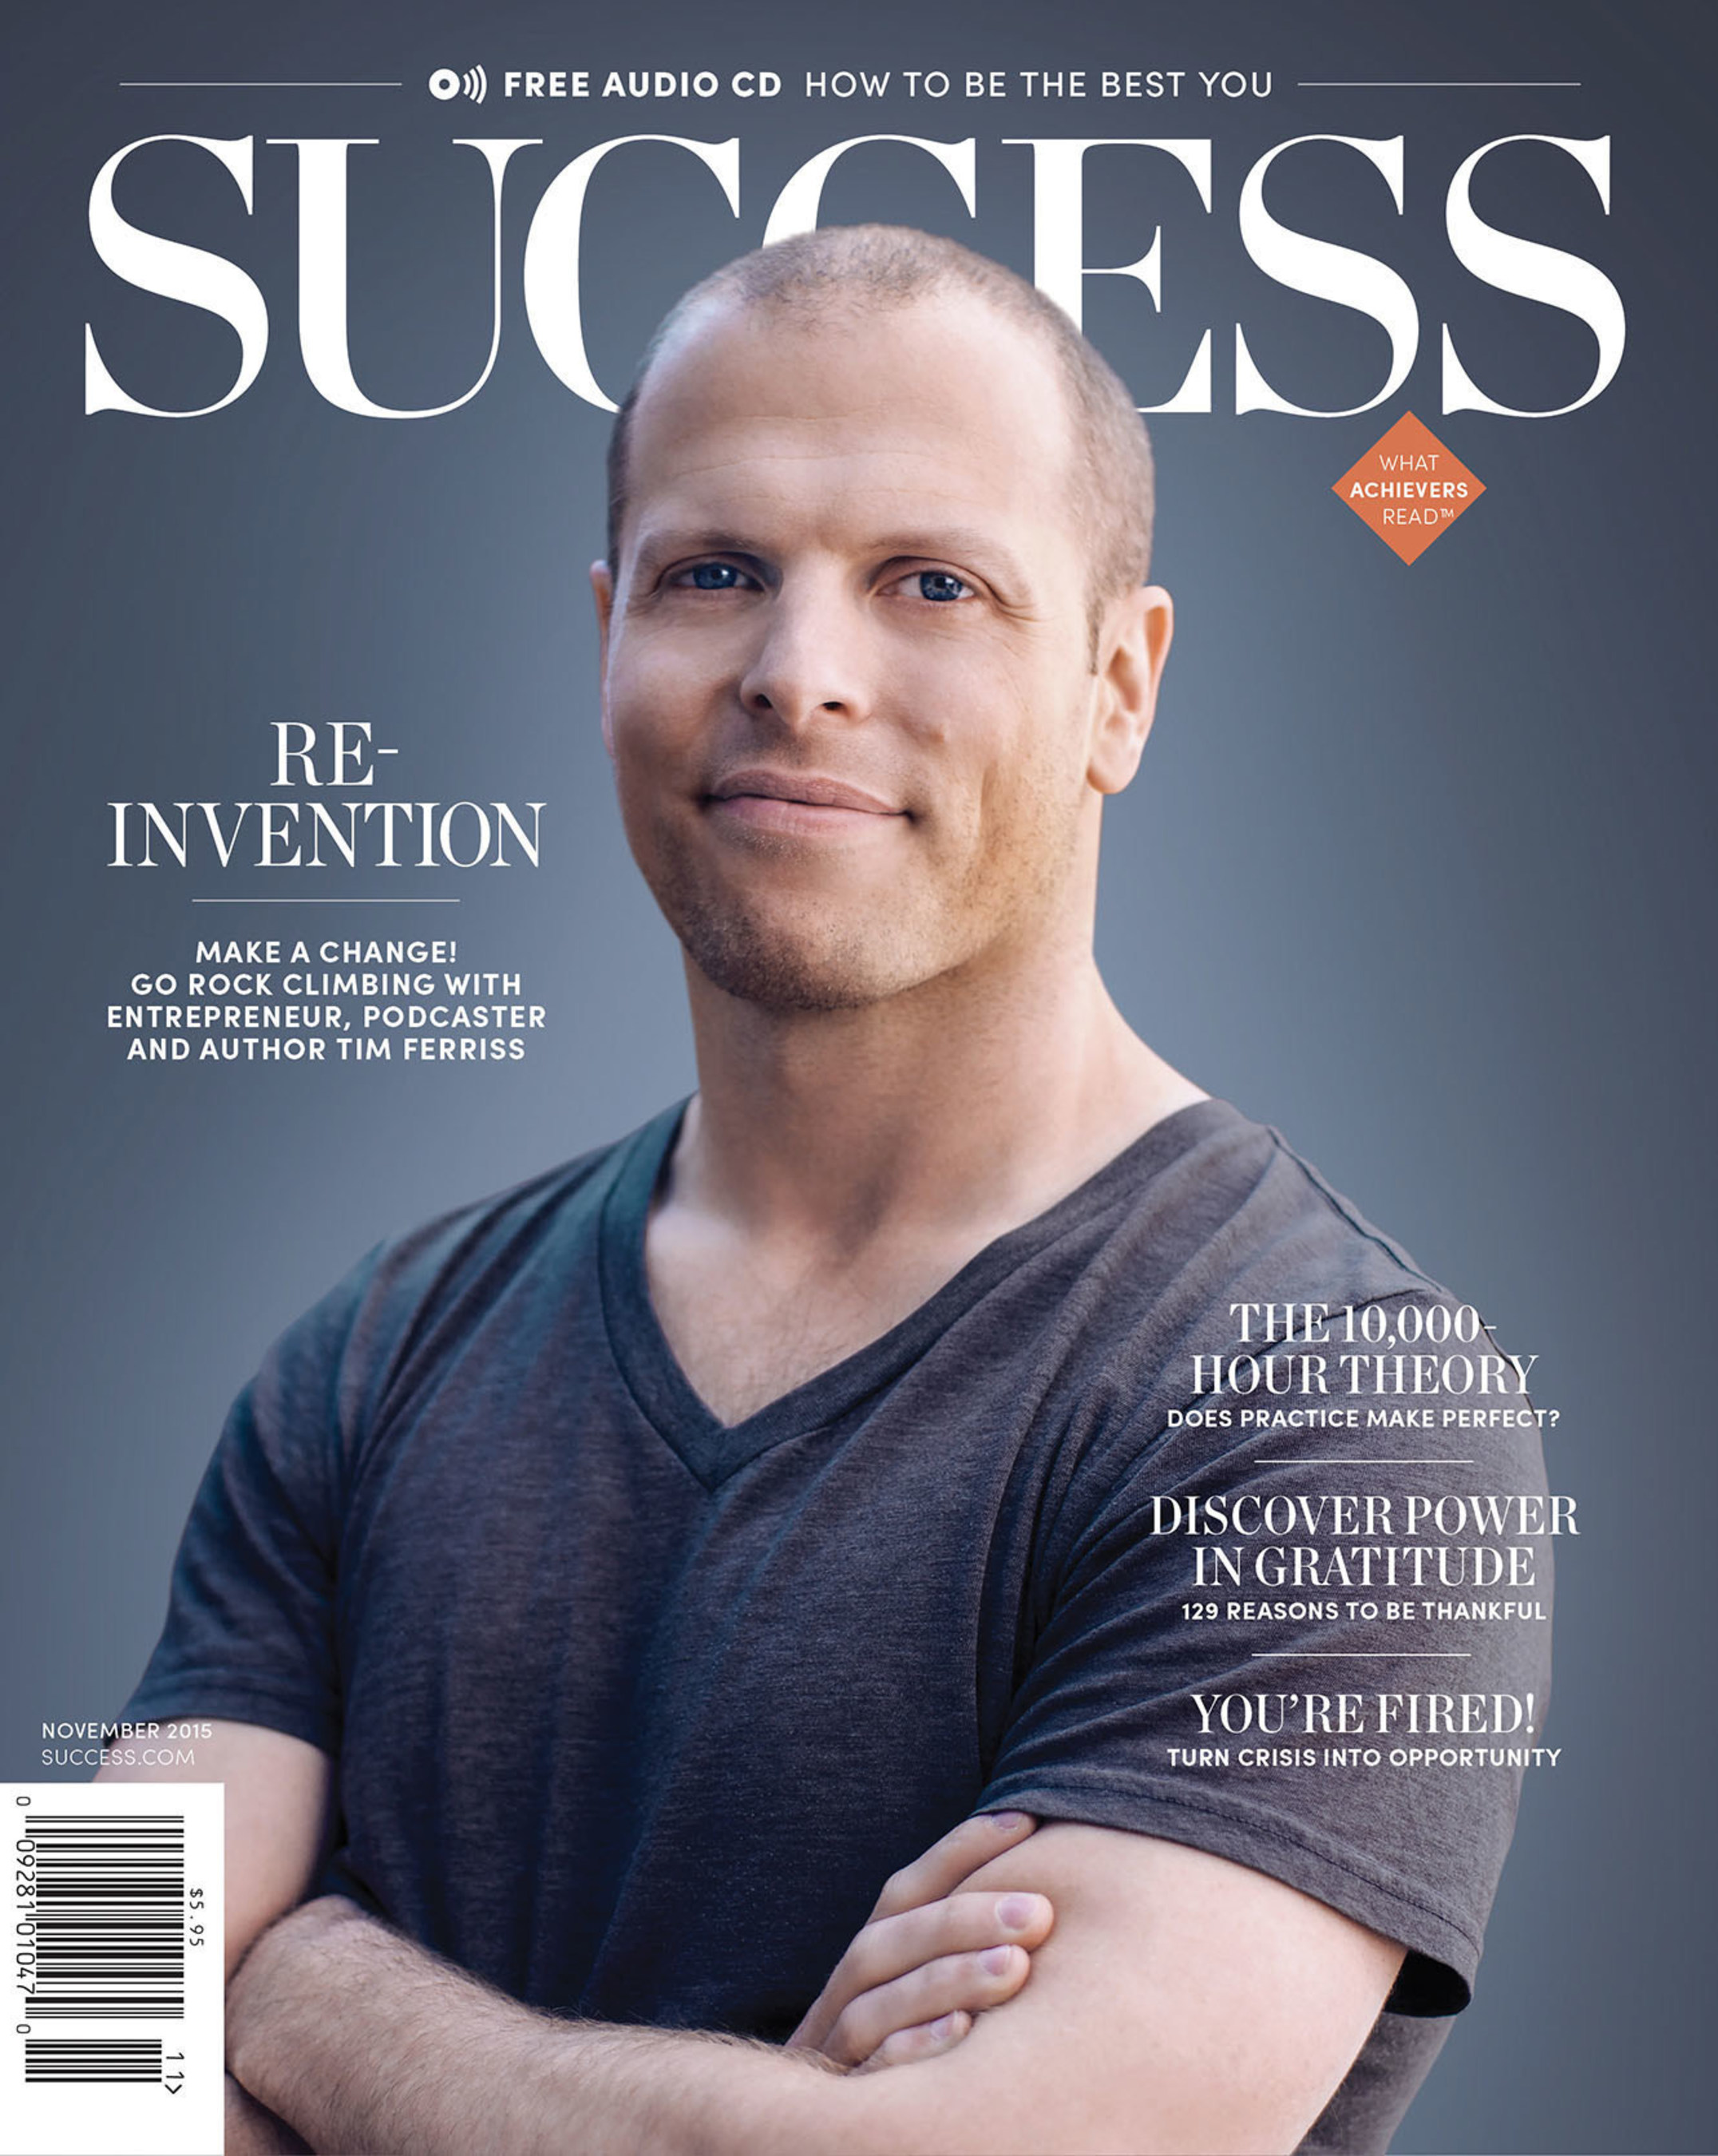 The Reinvention Issue: Make a change! Go rock climbing with entrepreneur, pod-caster, and author Tim Ferriss.  "Reinvention comes down to asking better questions about yourself, your direction, your objectives, and also being very honest. It's something that everyone has the capacity to do, but a lot of people fear doing."-Tim Ferriss tells SUCCESS magazine, November 2015 cover story